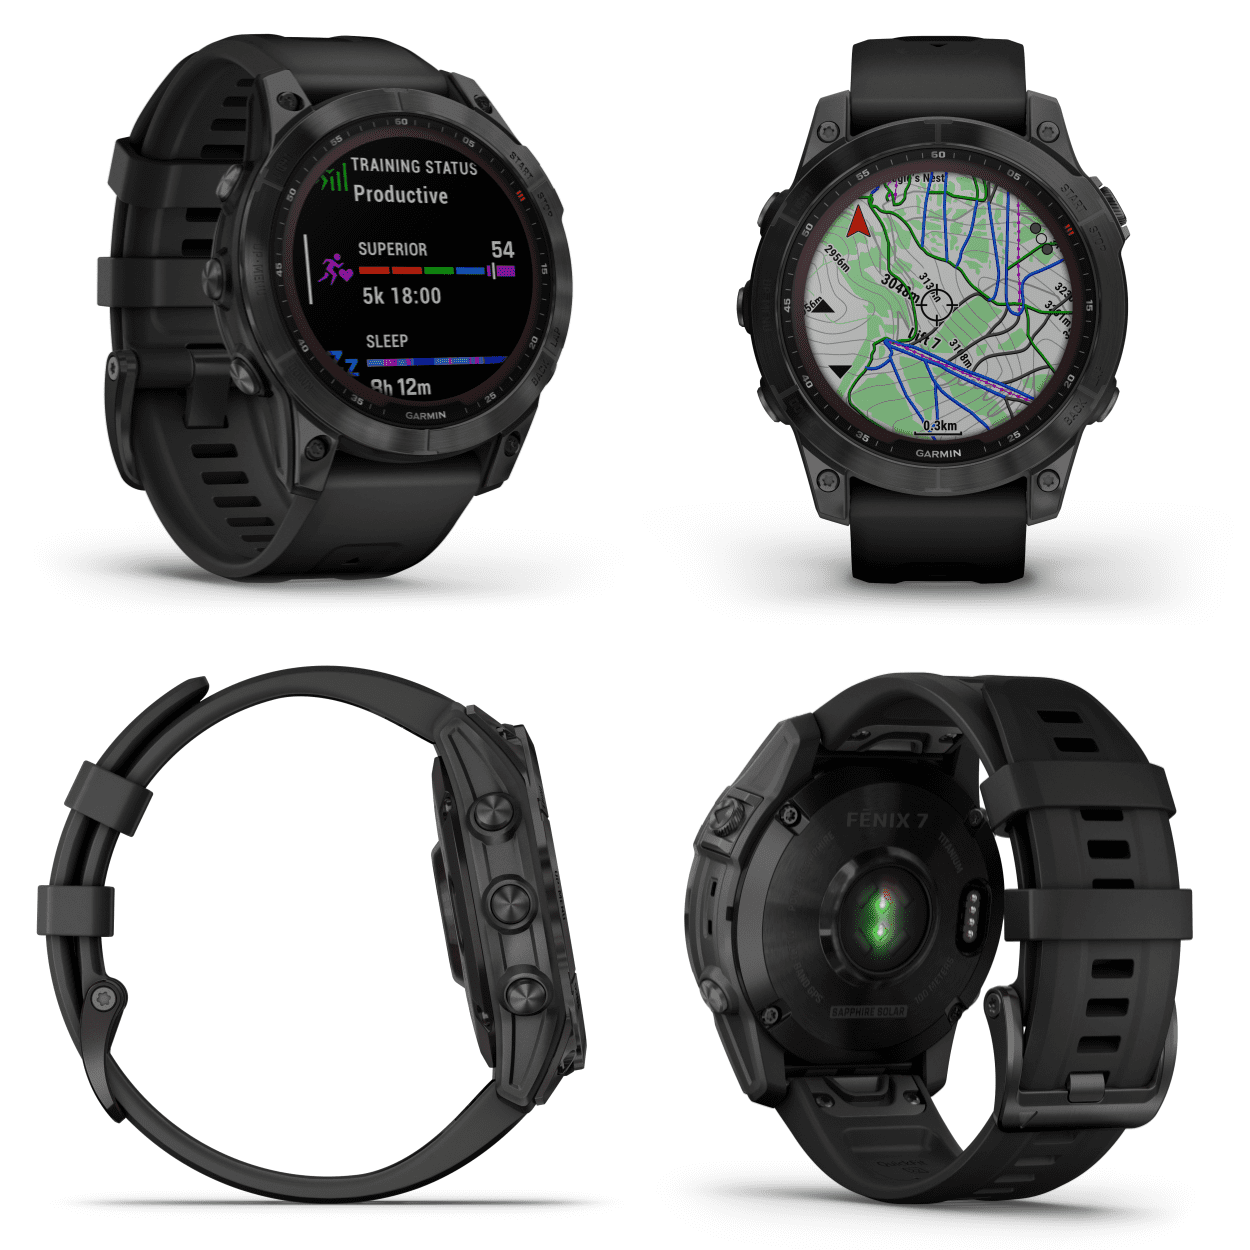  Garmin fenix 7 Sapphire Solar, adventure smartwatch, with Solar  Charging Capabilities, rugged outdoor watch with GPS, touchscreen, wellness  features, mineral blue DLC titanium whitestone band : Electronics